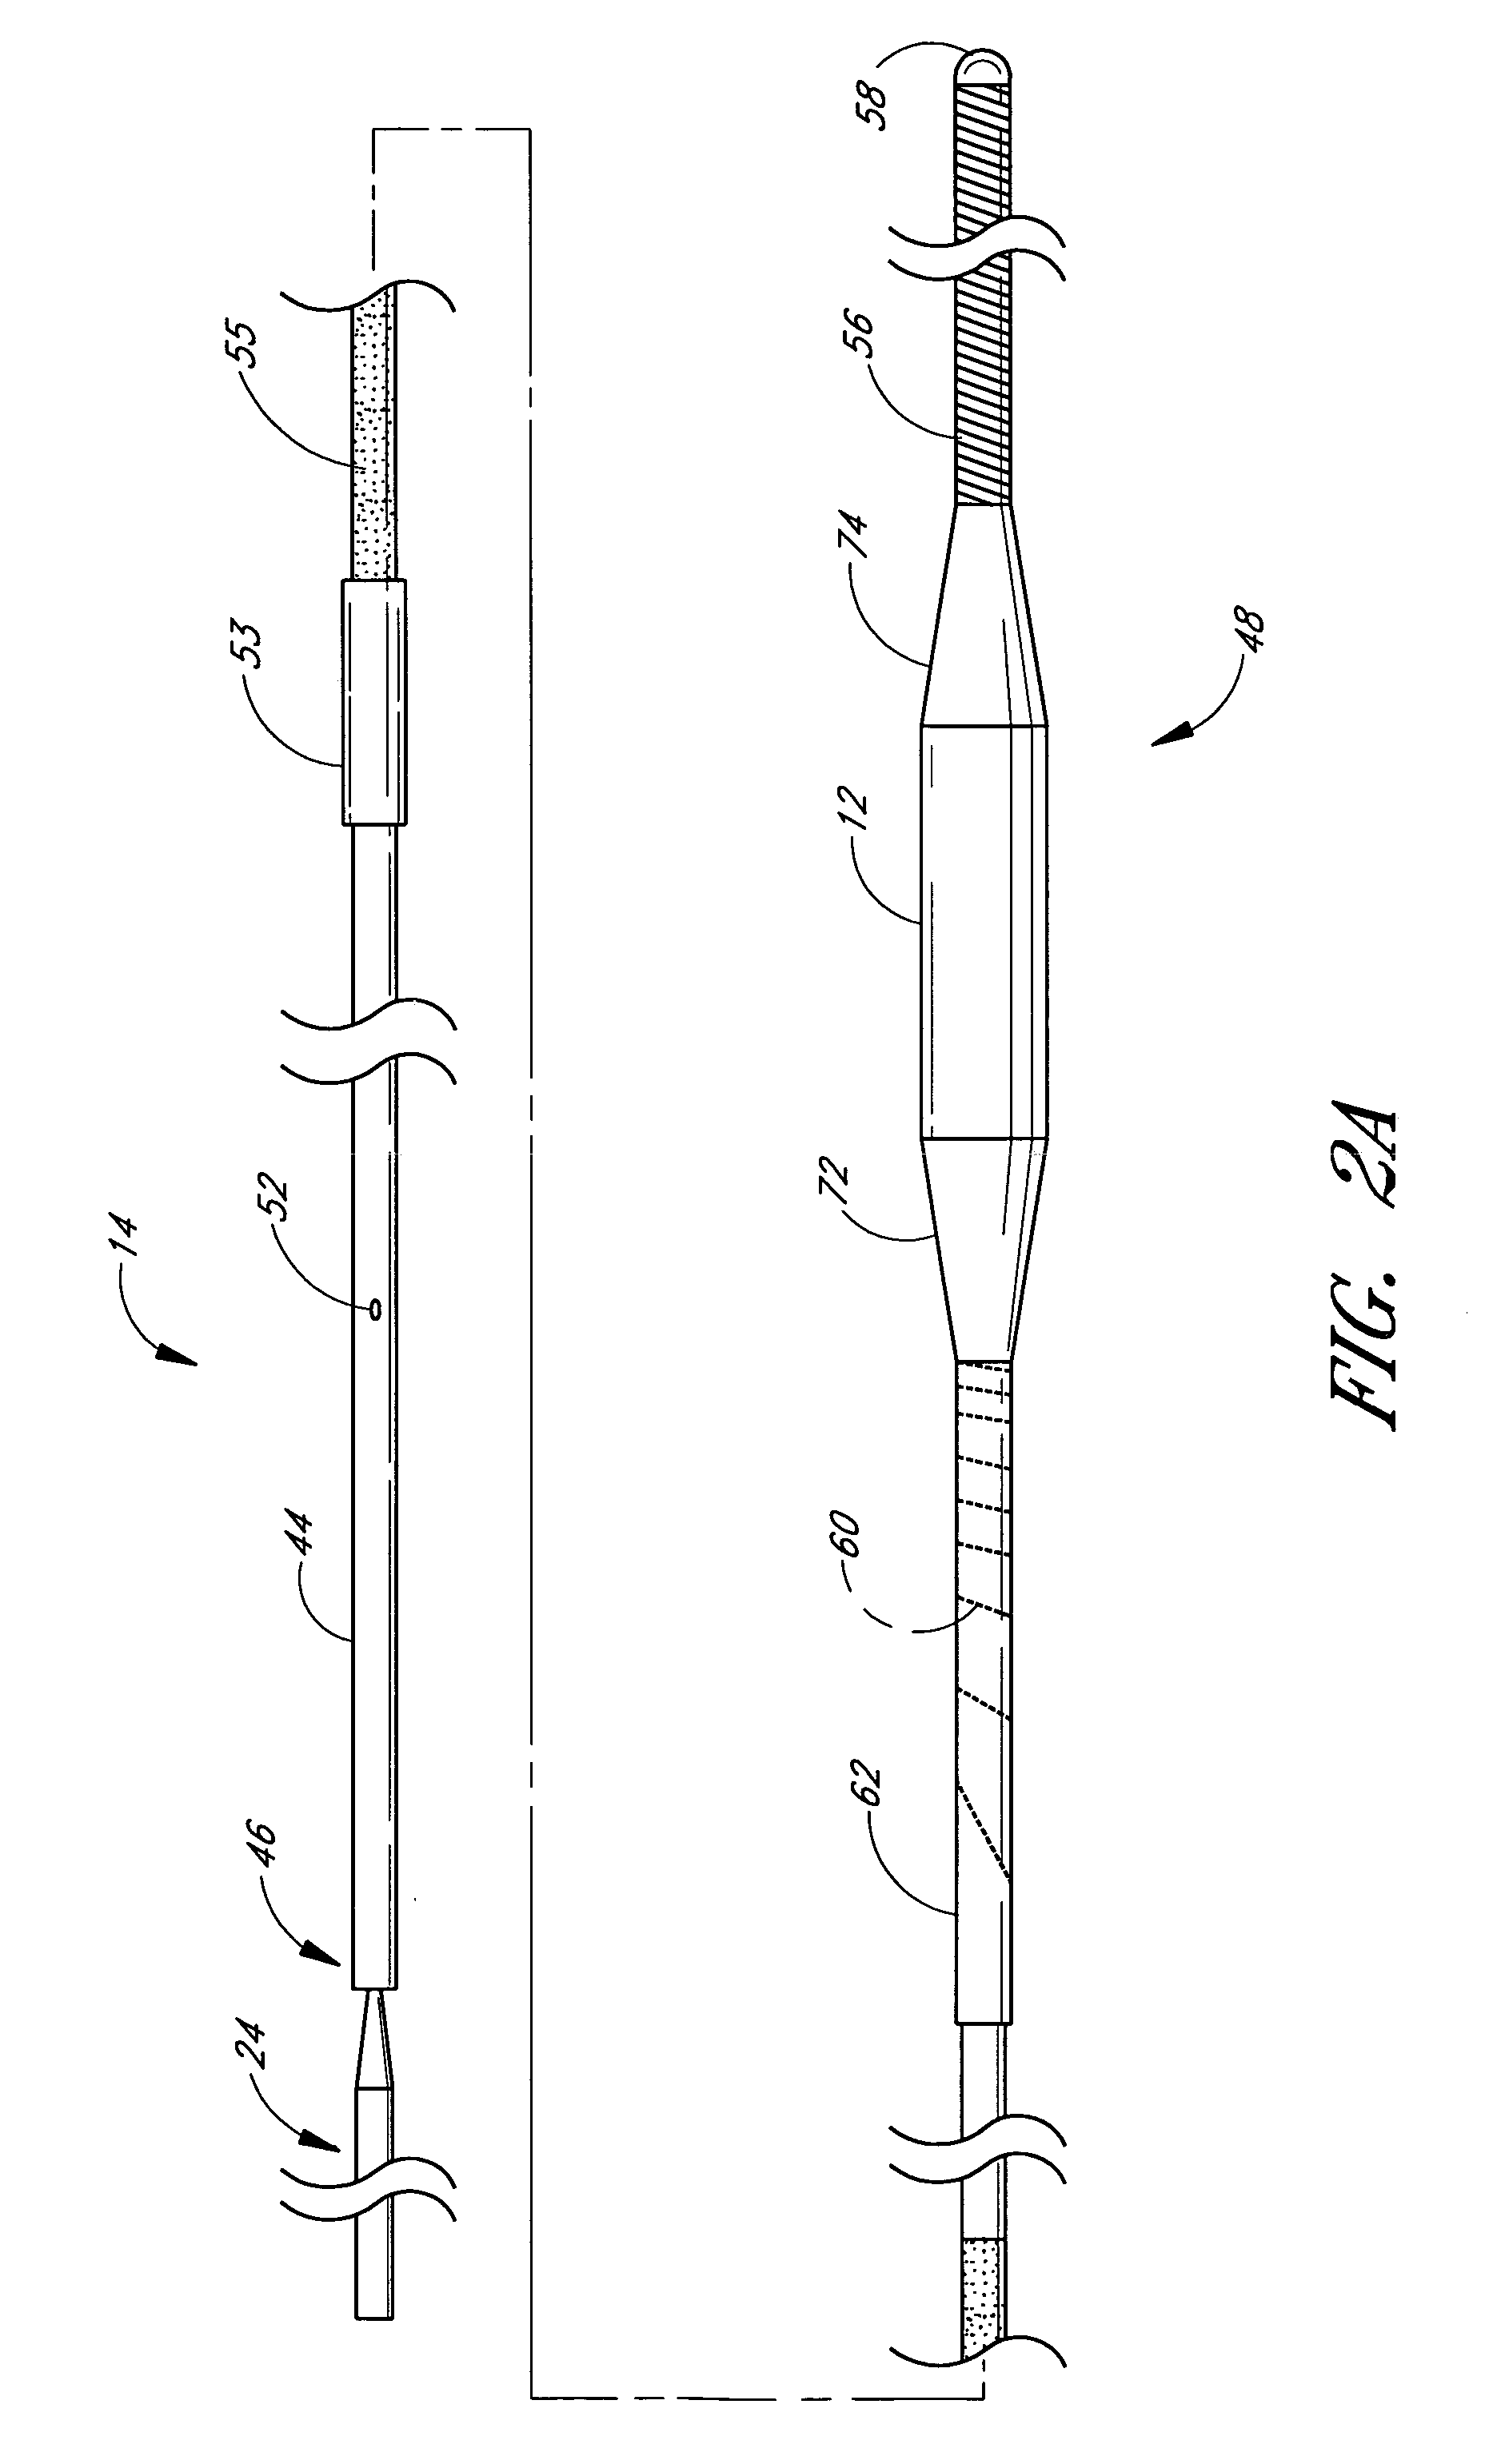 Method and apparatuses for treating an intravascular occlusion